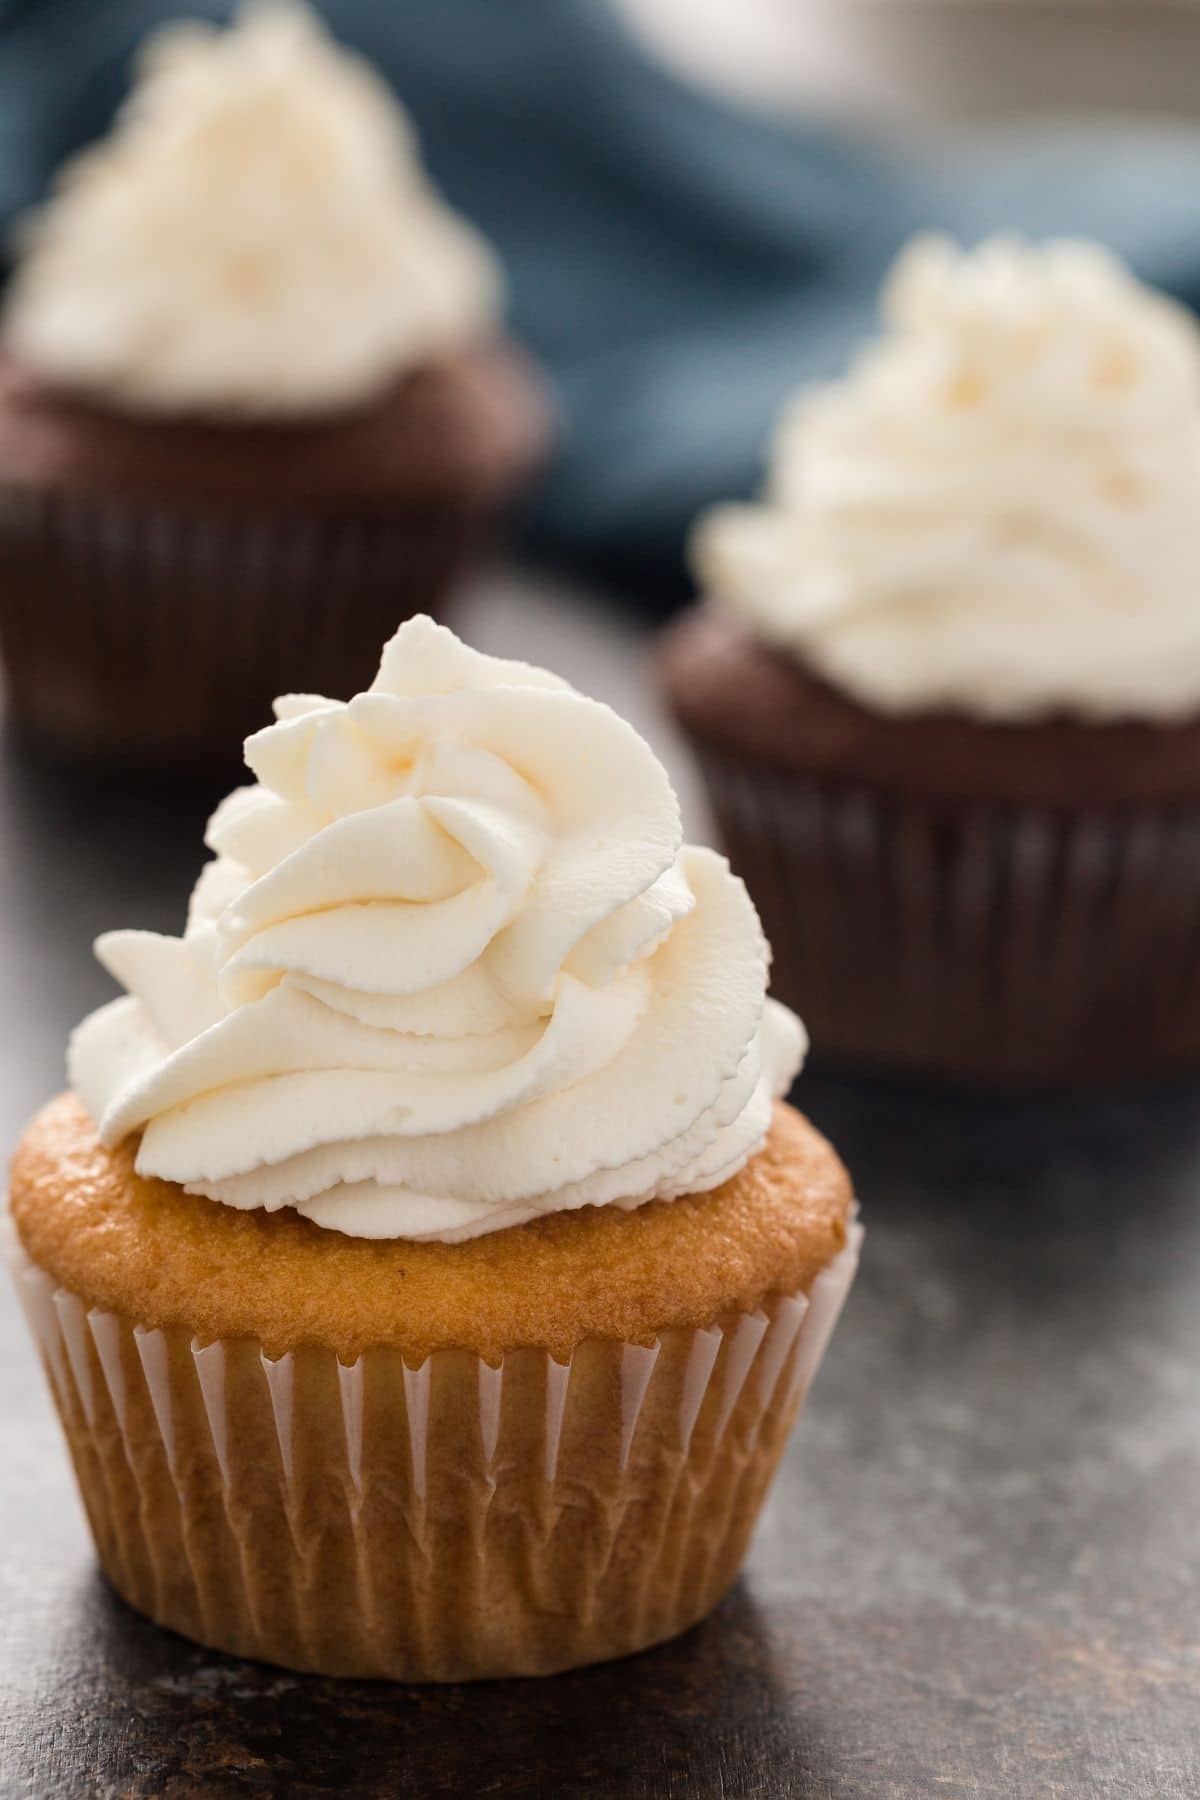 whipped cream swirled over a vanilla cupcake with chocolate cupcakes in the background